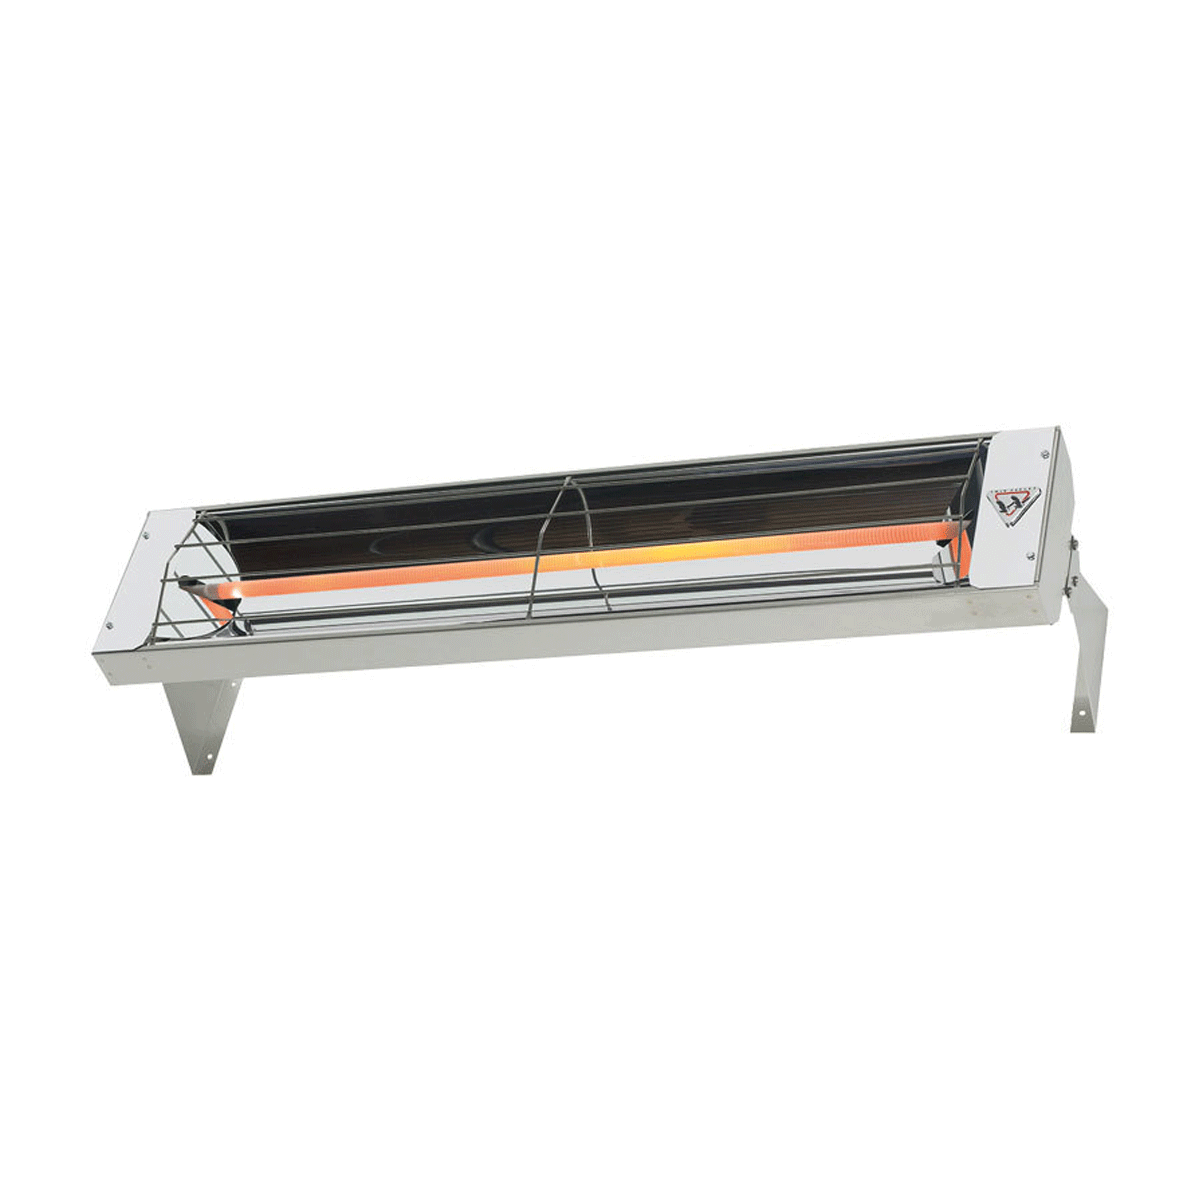 39" Electric Radiant Heater